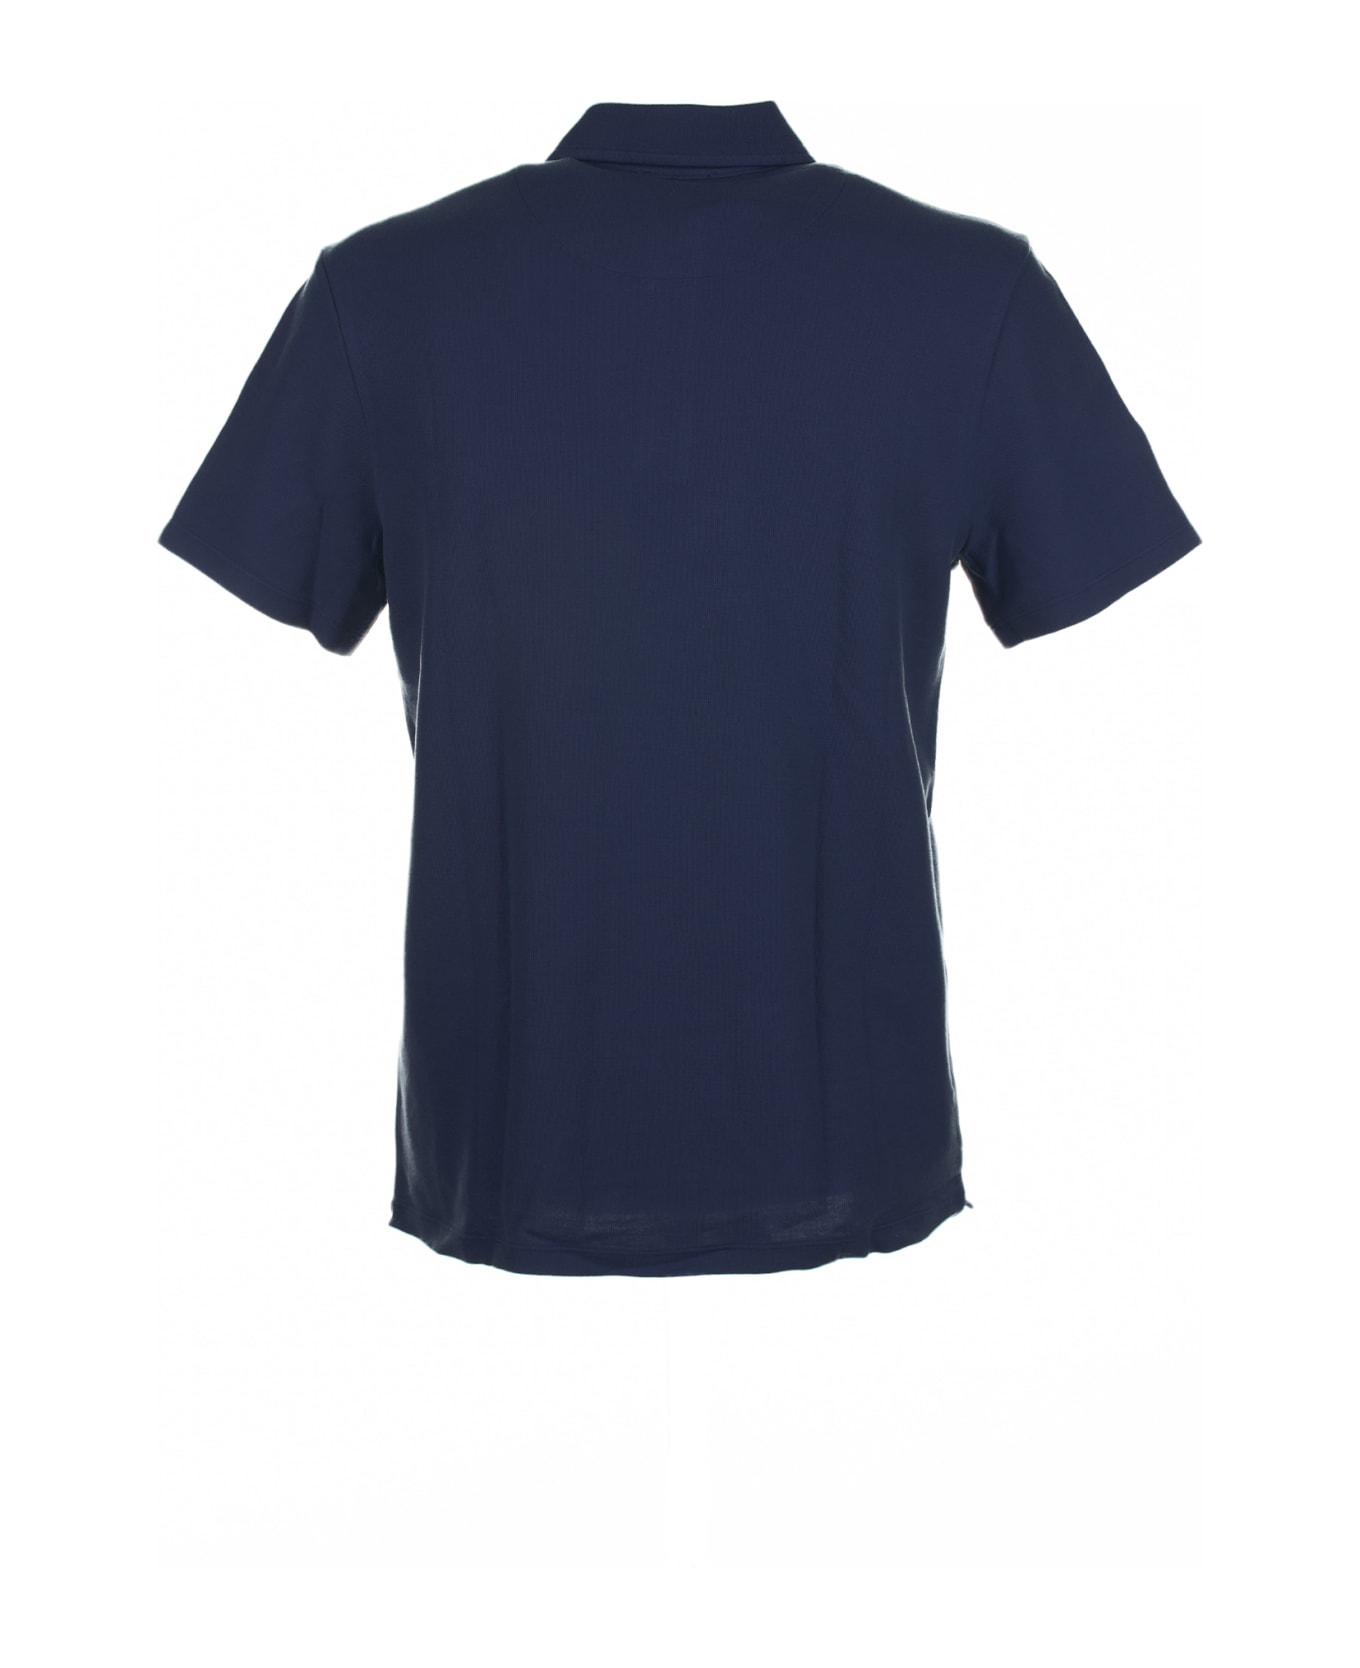 Altea Blue Short-sleeved Polo Shirt In Cotton - Blu ポロシャツ